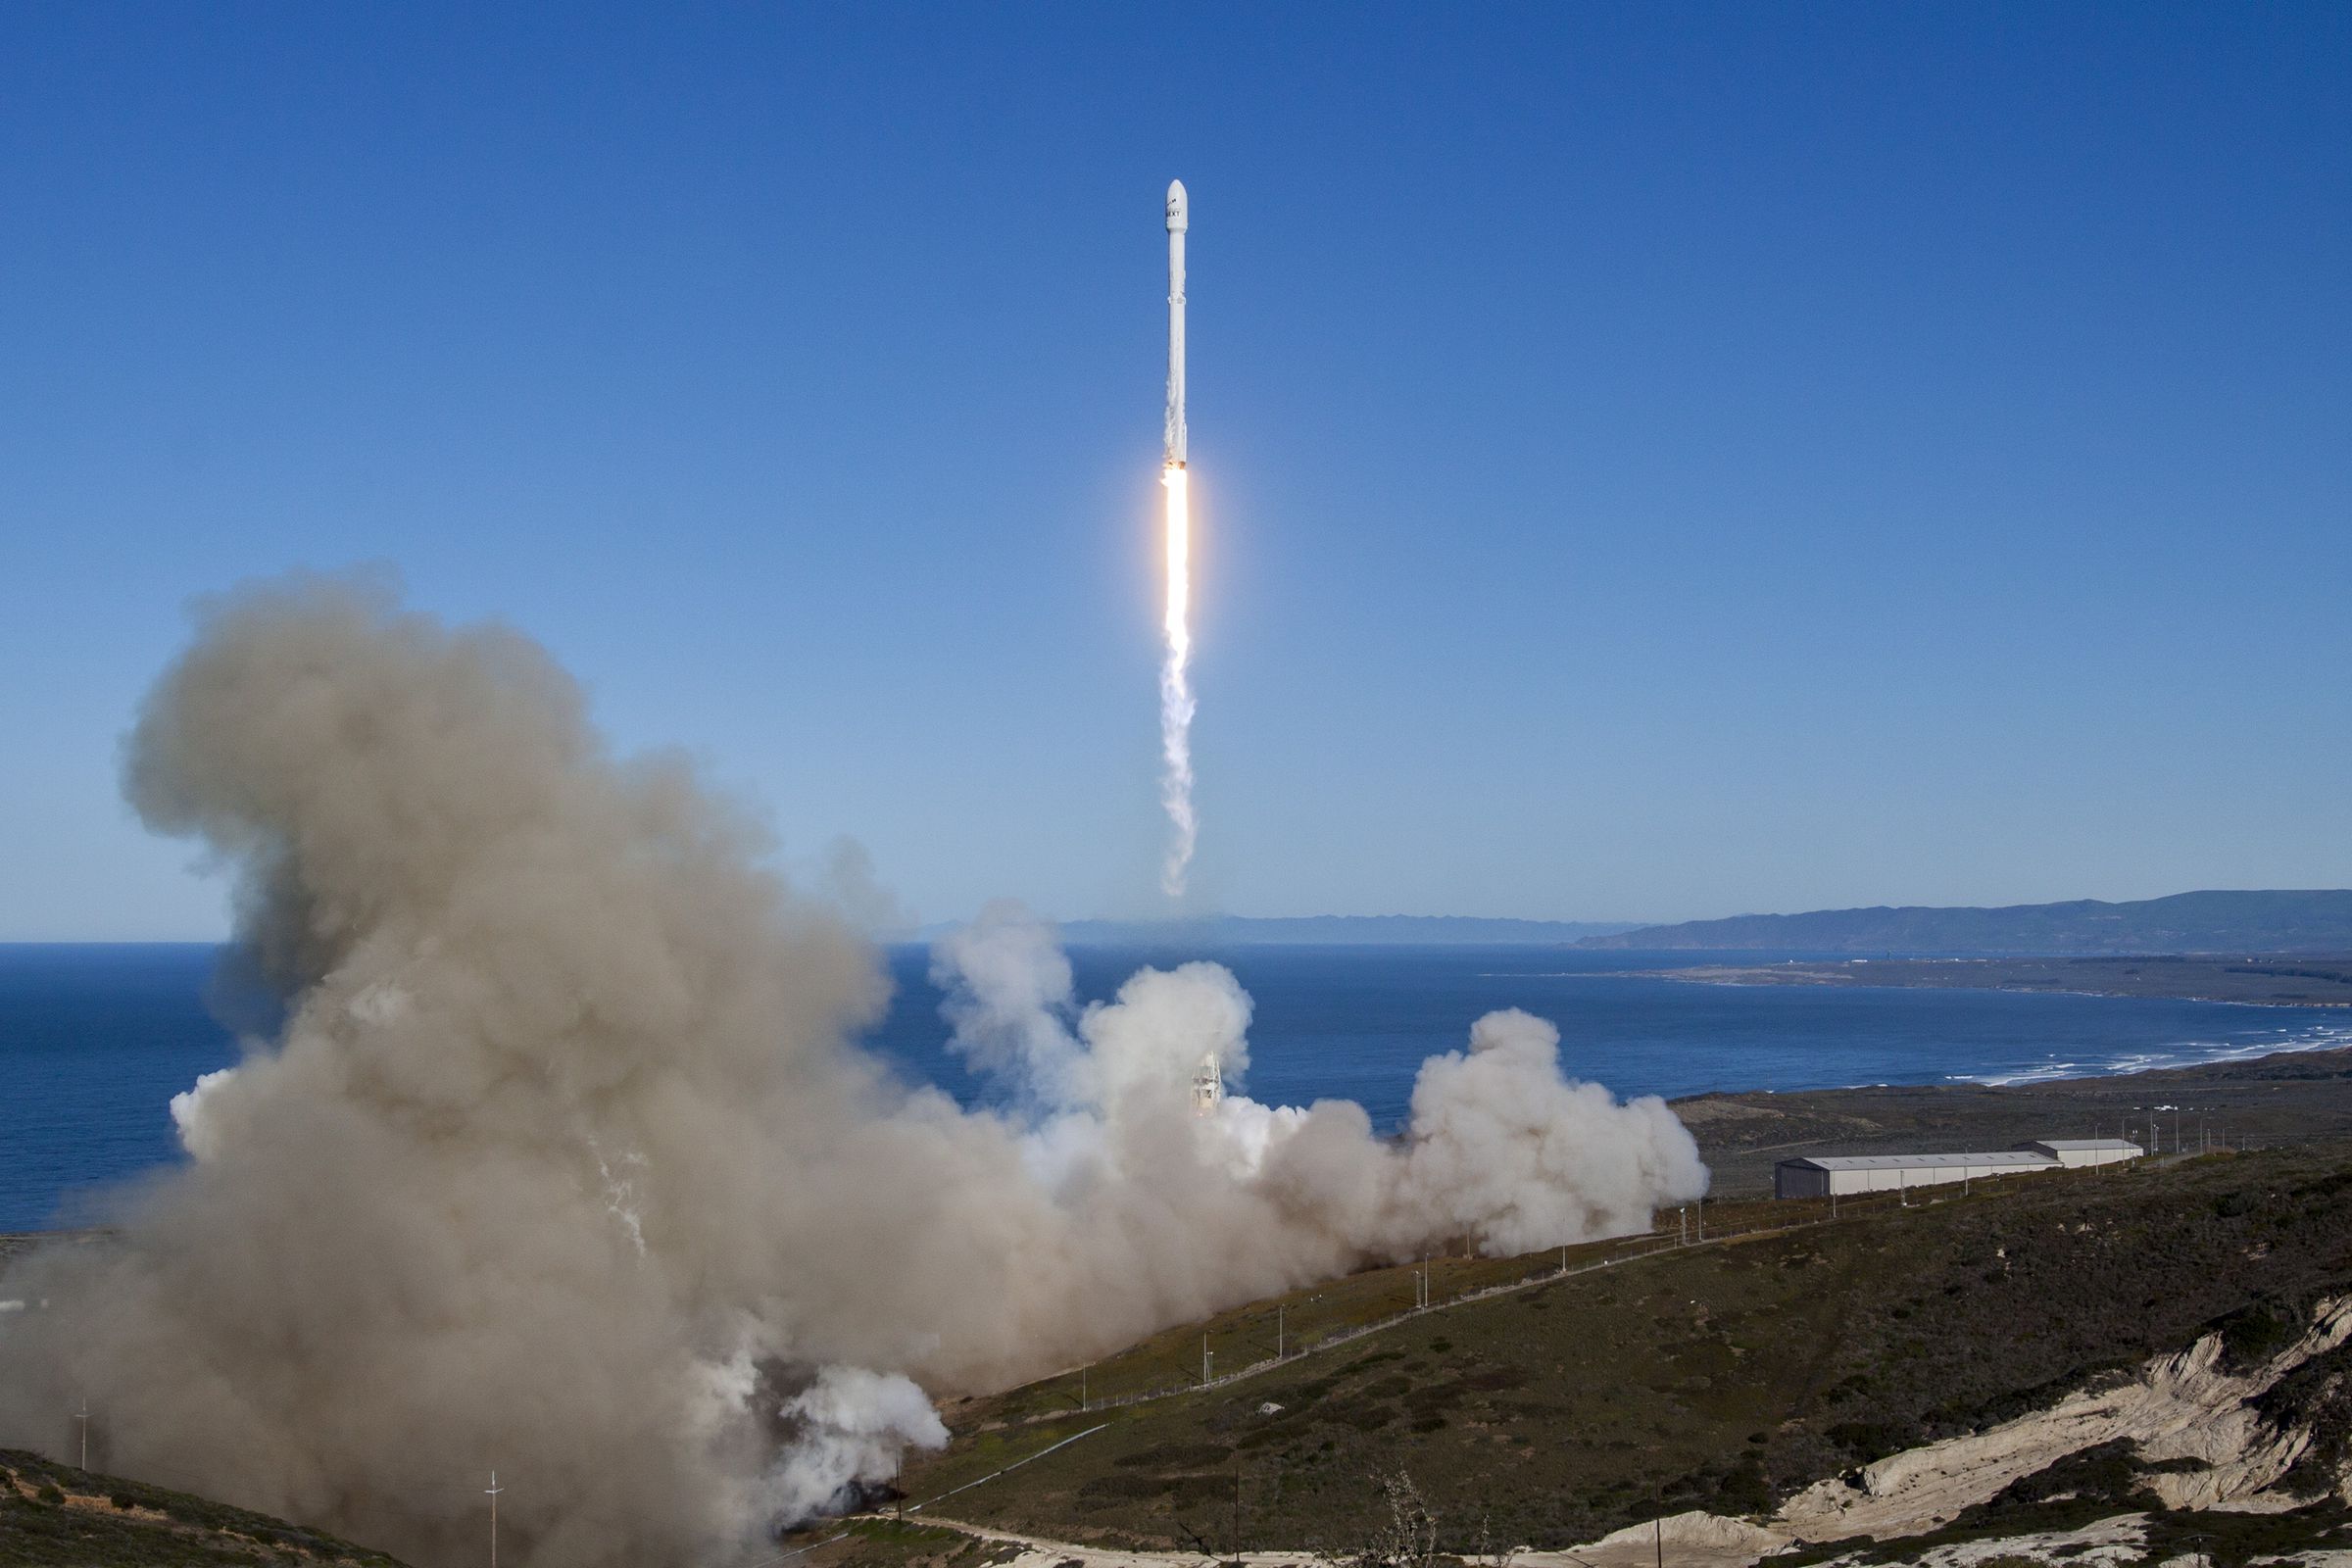 SpaceX’s Falcon 9 rocket launching the first 10 Iridium NEXT satellites from Vandenberg Air Force Base.